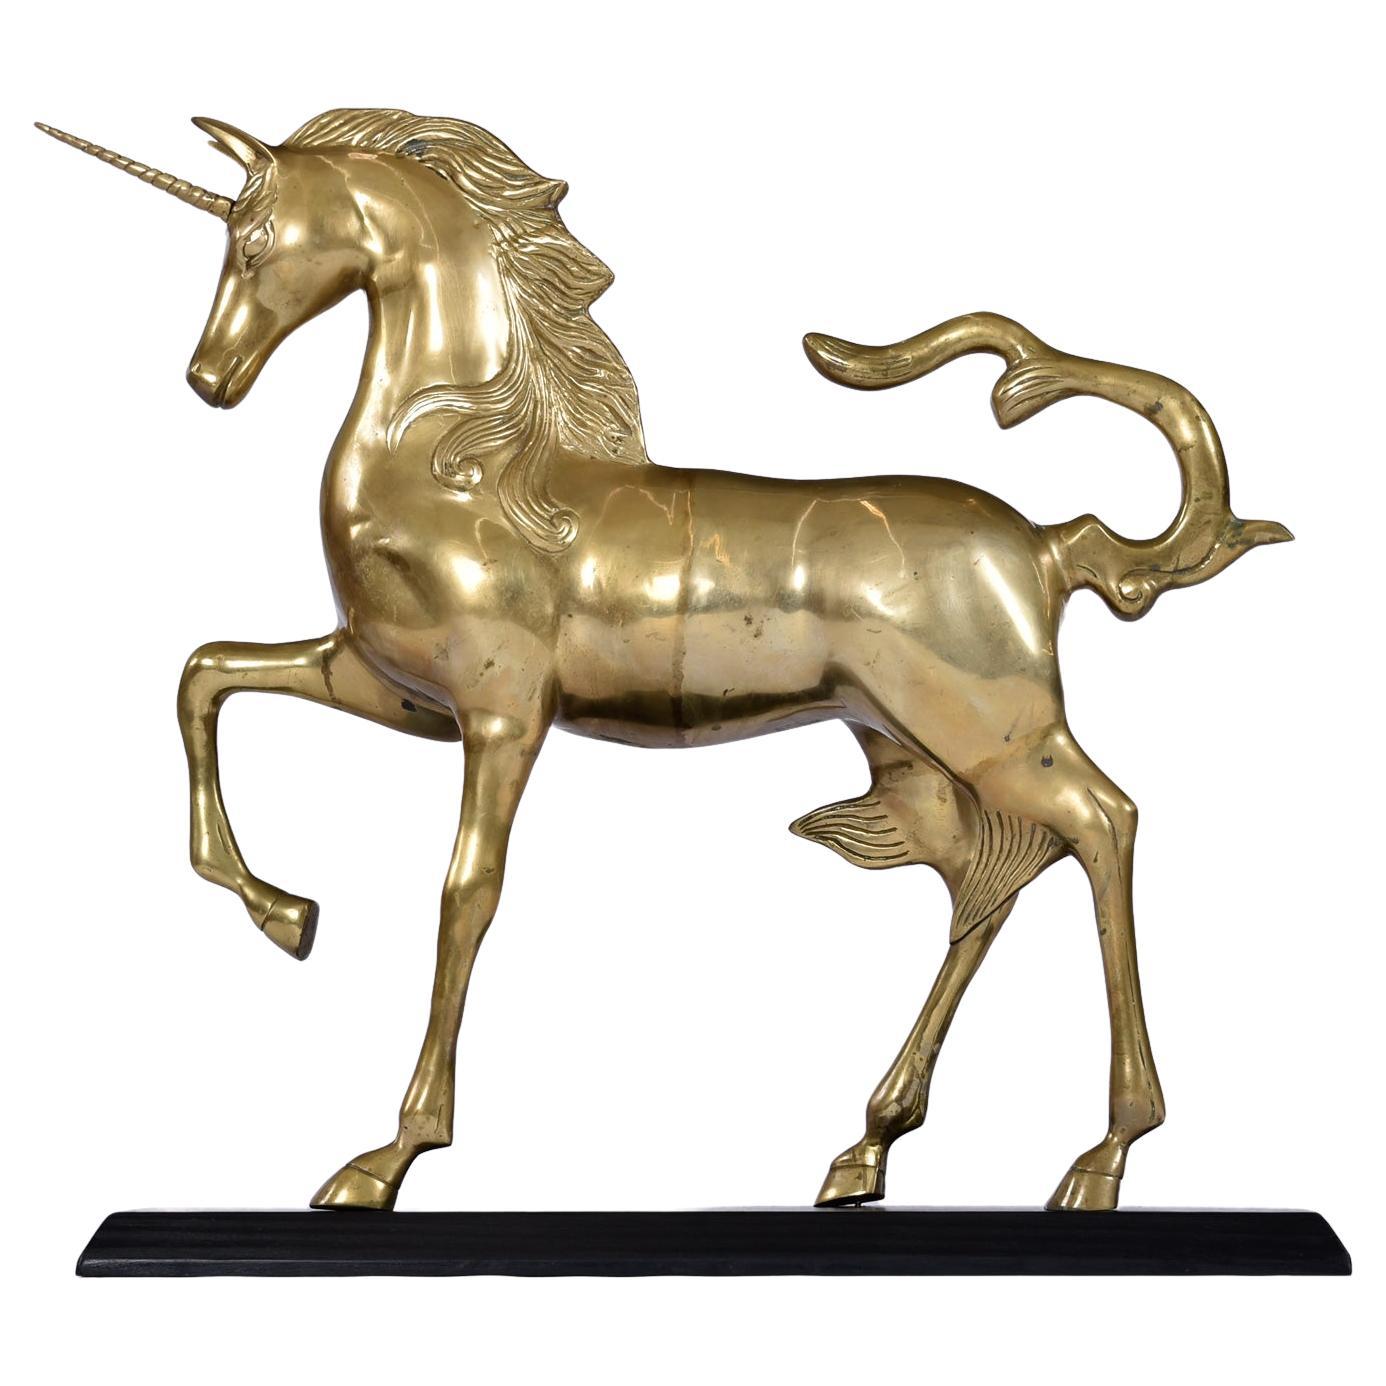 Monumental 1970s Decorative Hollywood Regency Solid Brass Unicorn Horse For Sale